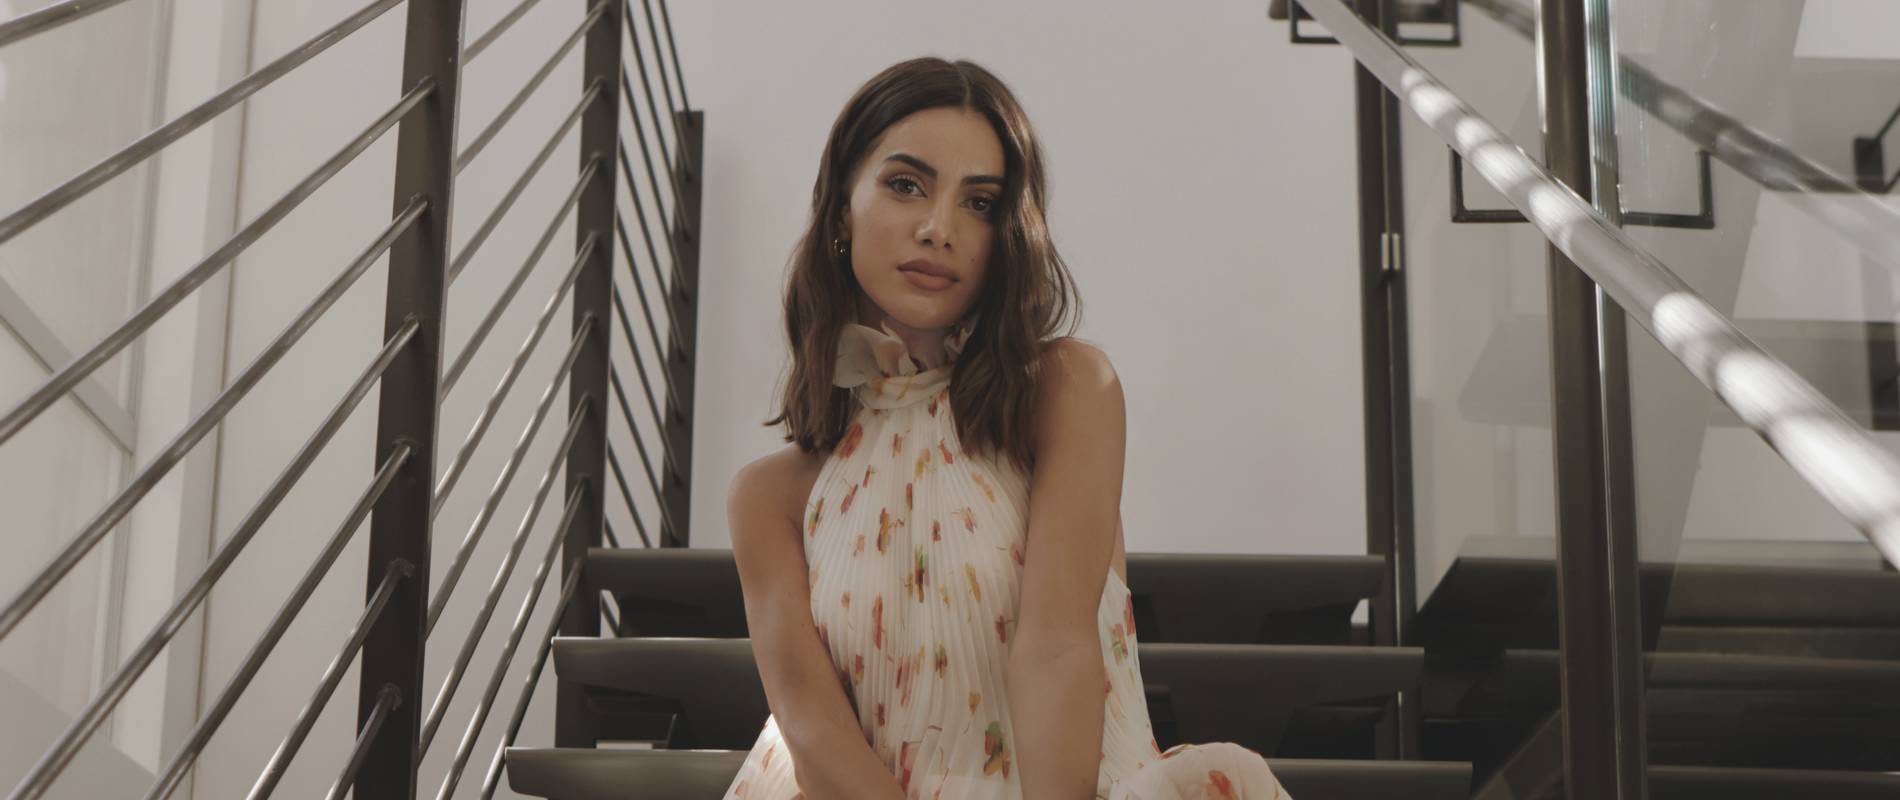 Brazilian It-girl Camila Coelho shares delight on 'connecting with  community' in Saudi Arabia through clean beauty line